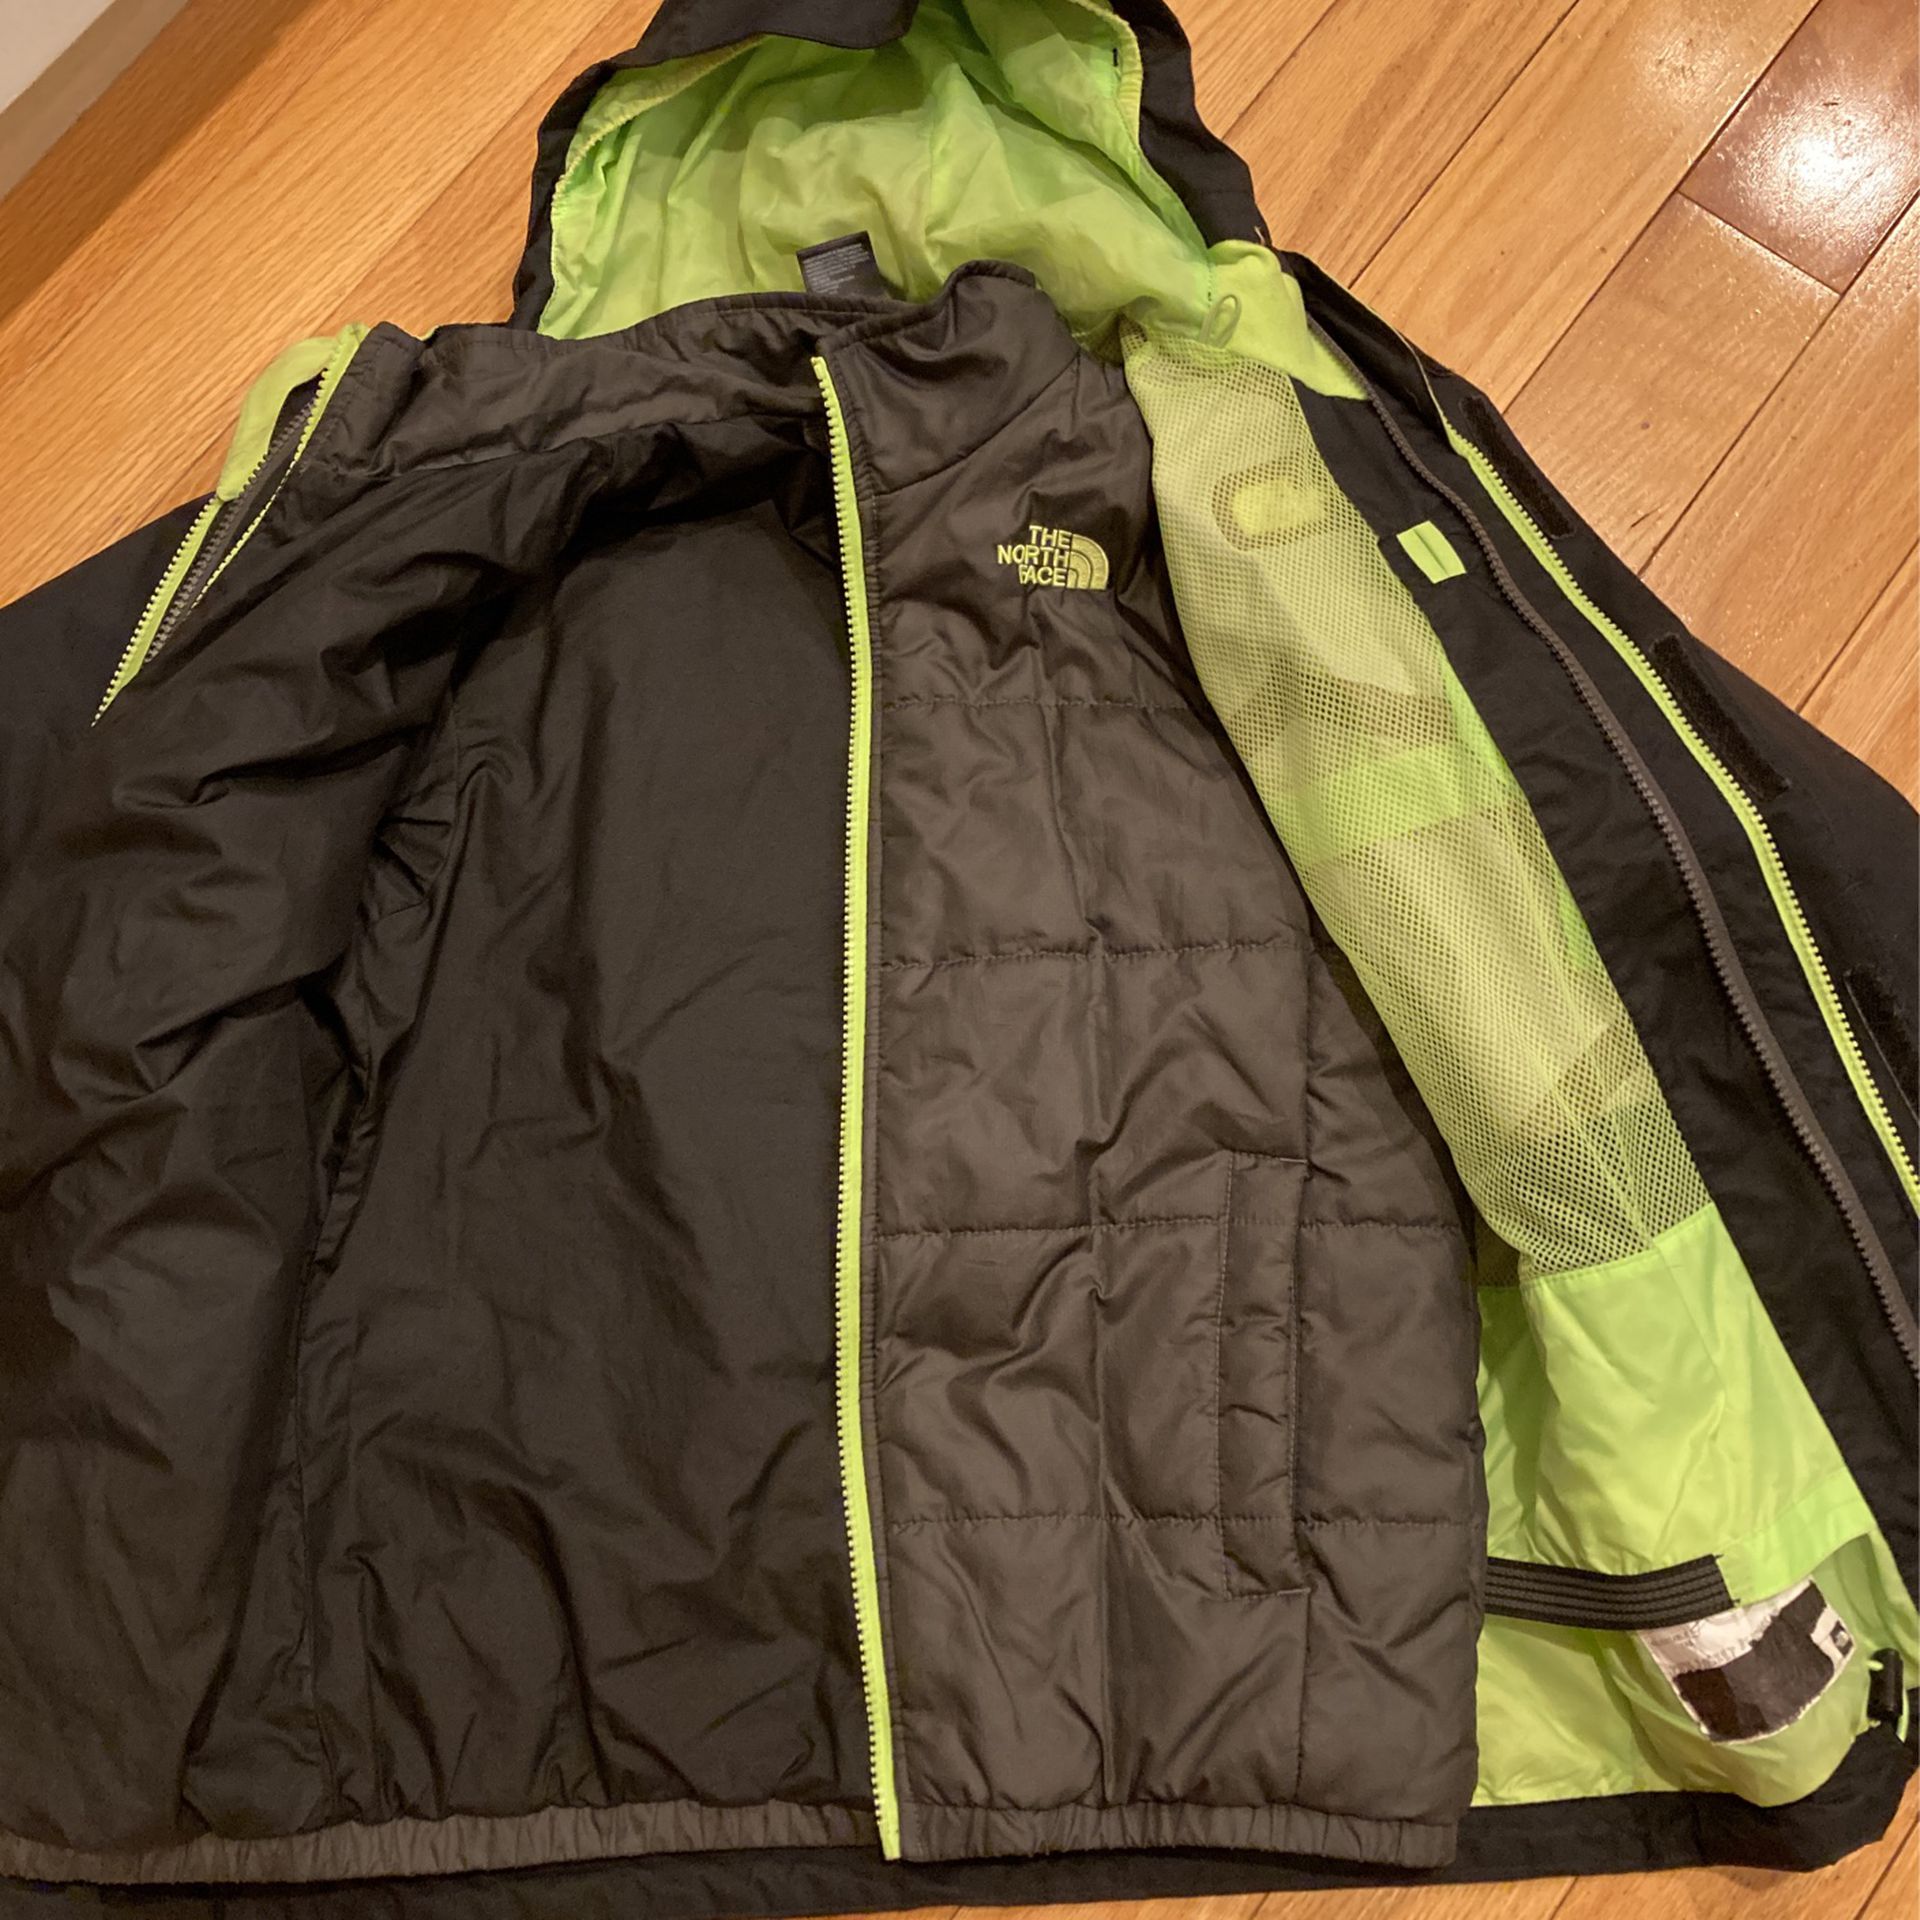 THE NORTH FACE PARKA 3in1 BOYS s 10/12